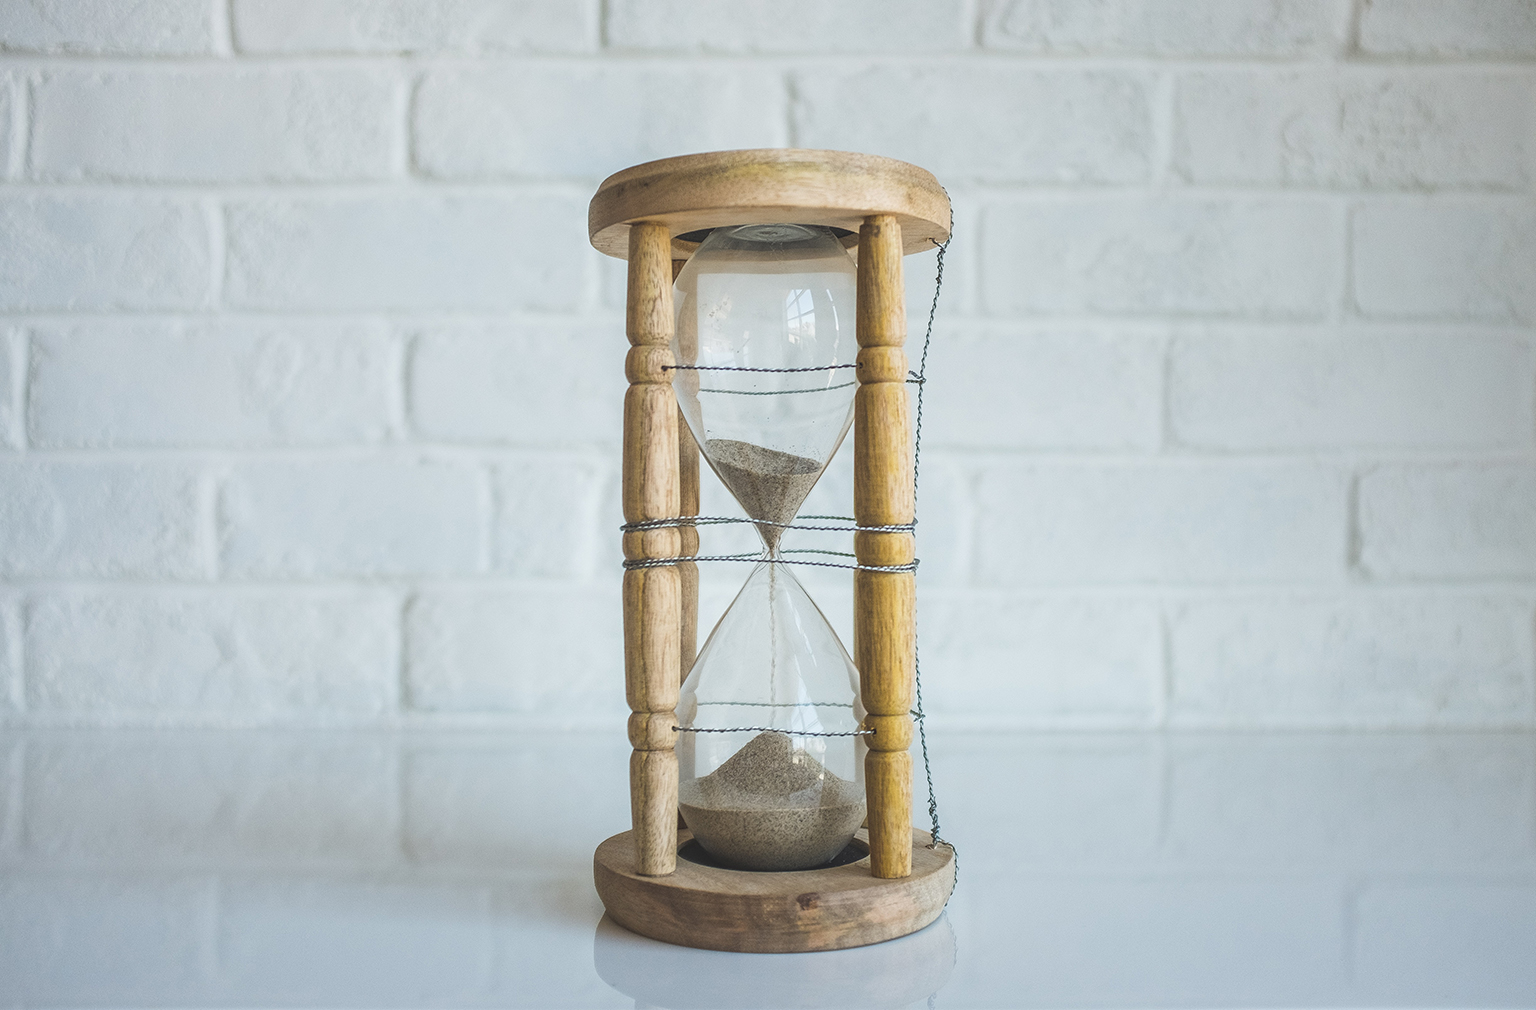 Hourglass sitting on white surface in front of white brick wall